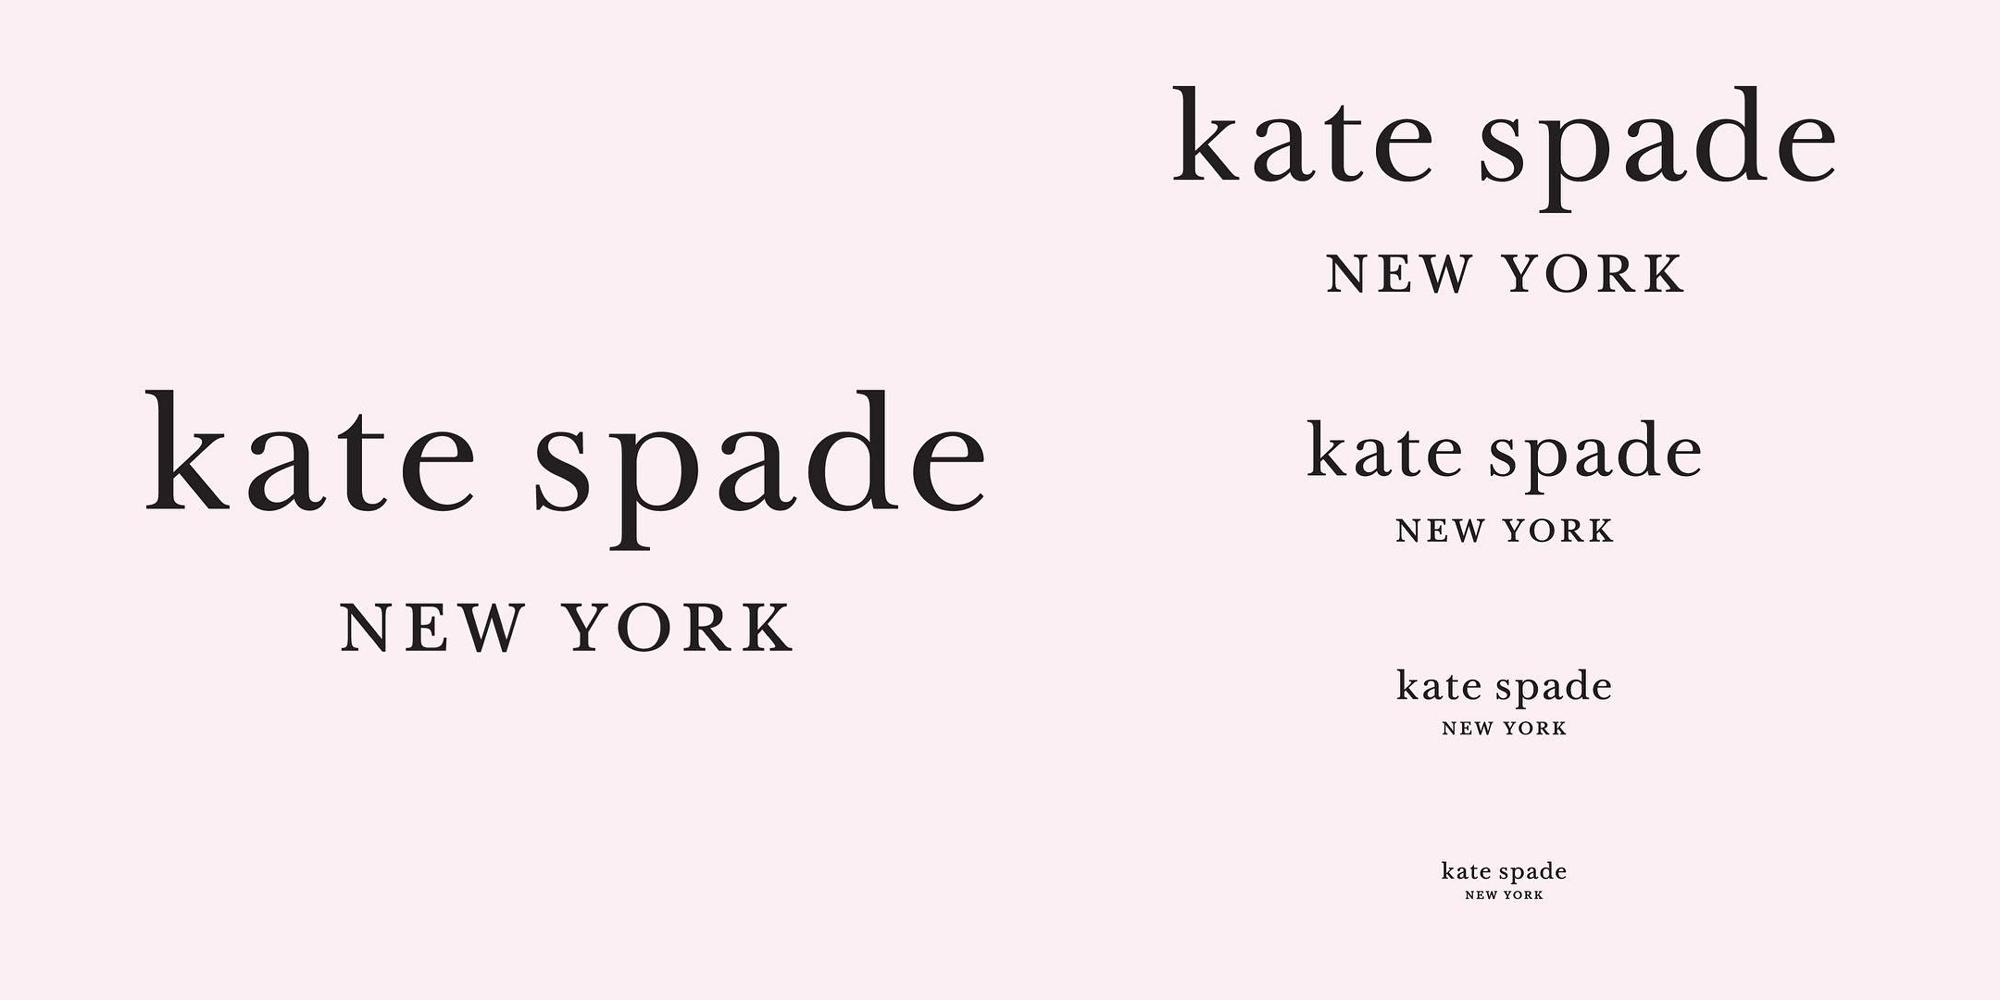 Kate Spade Size Chart Shoes